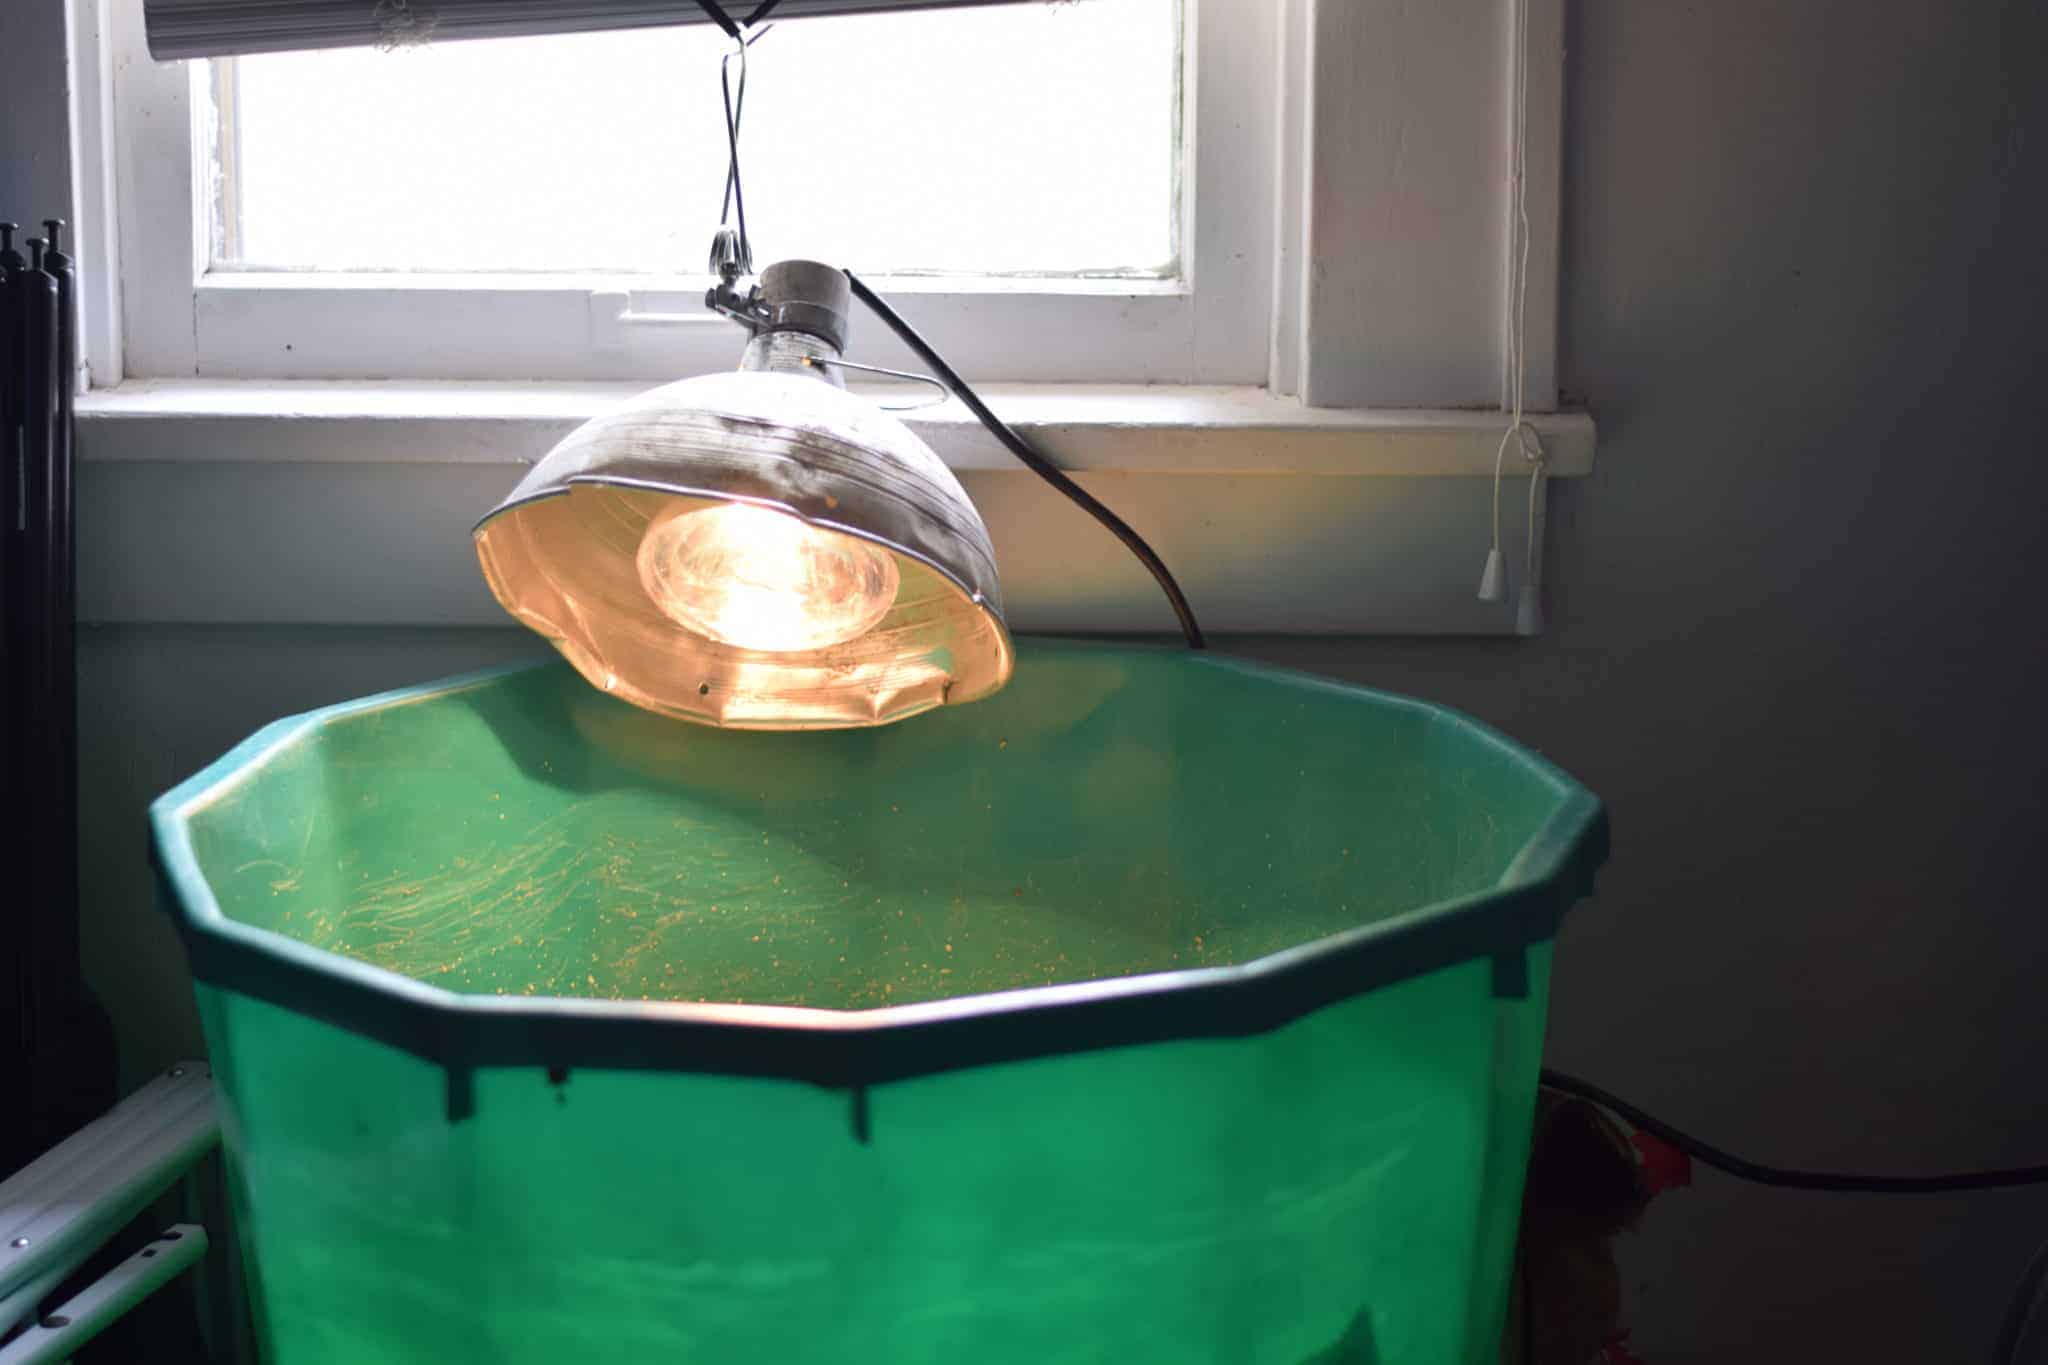 Our homemade brooder with a heat lamp